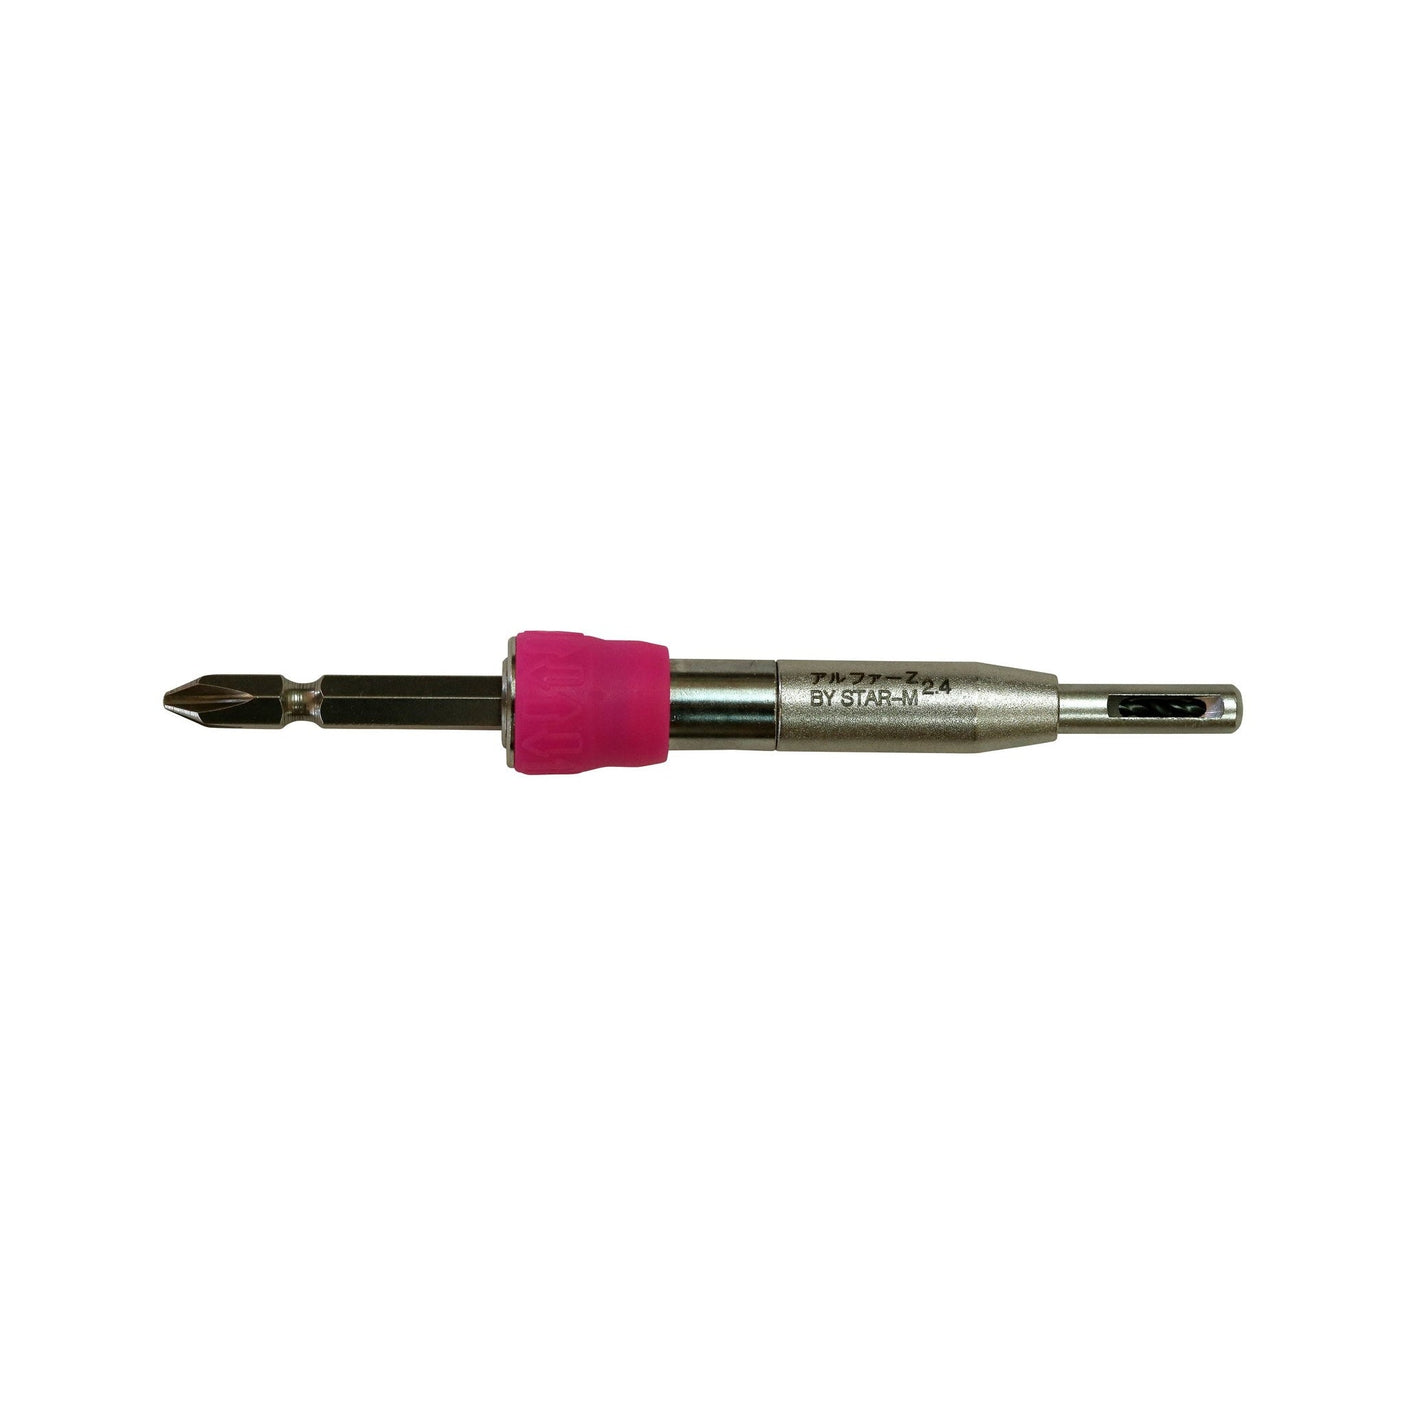 Self-centering drill and driver - Drill Bits - Japanese Tools Australia